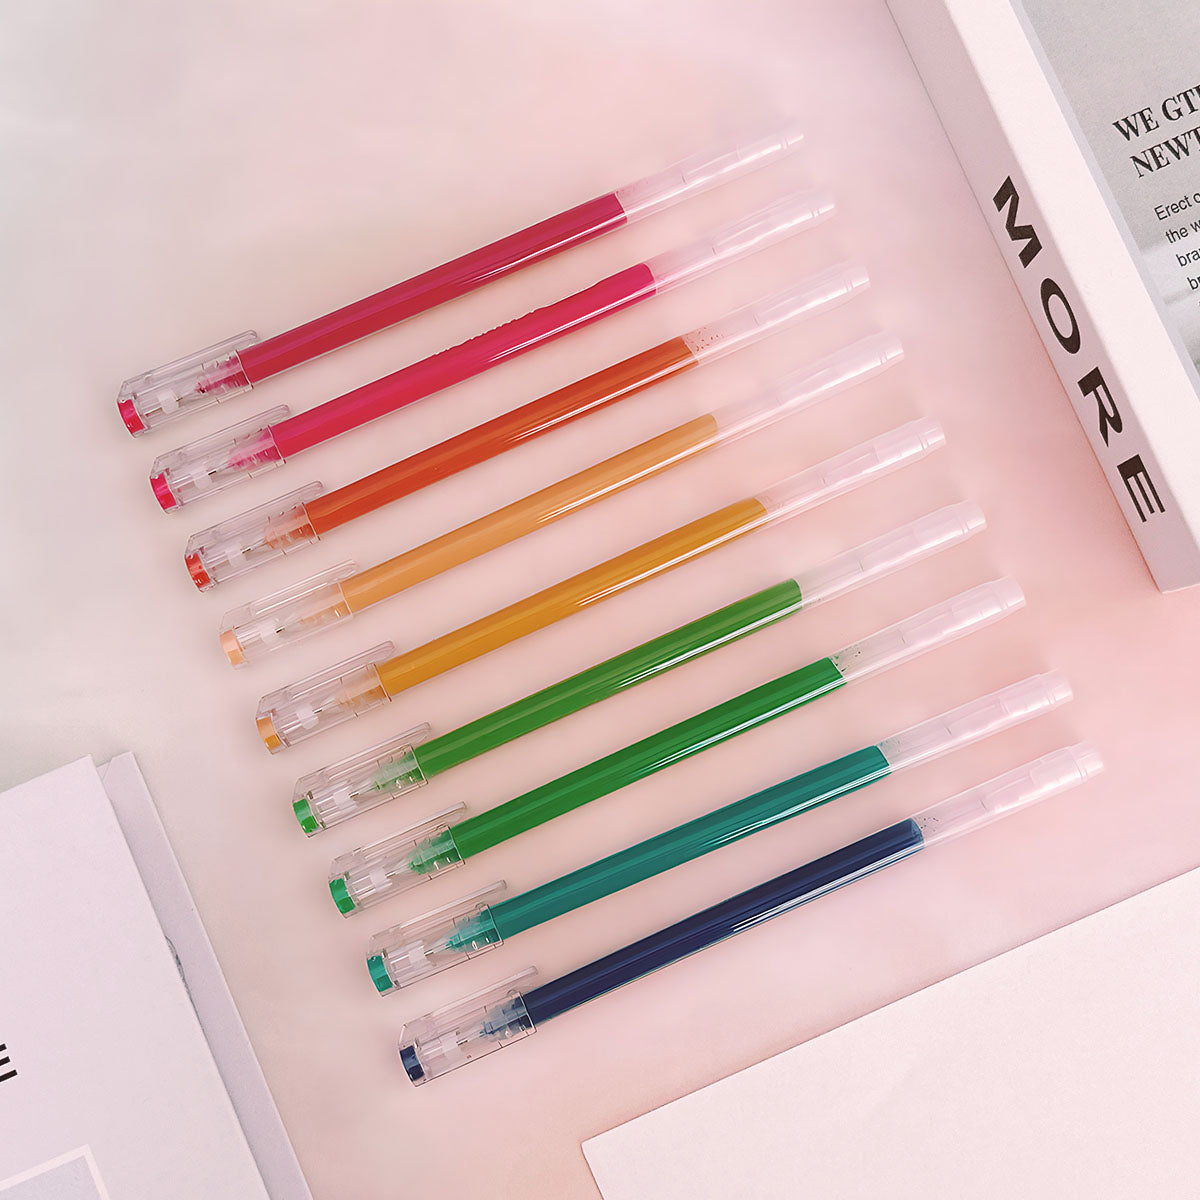 Wrapables Colorful Vibrant Retractable Ballpoint Pens for Home